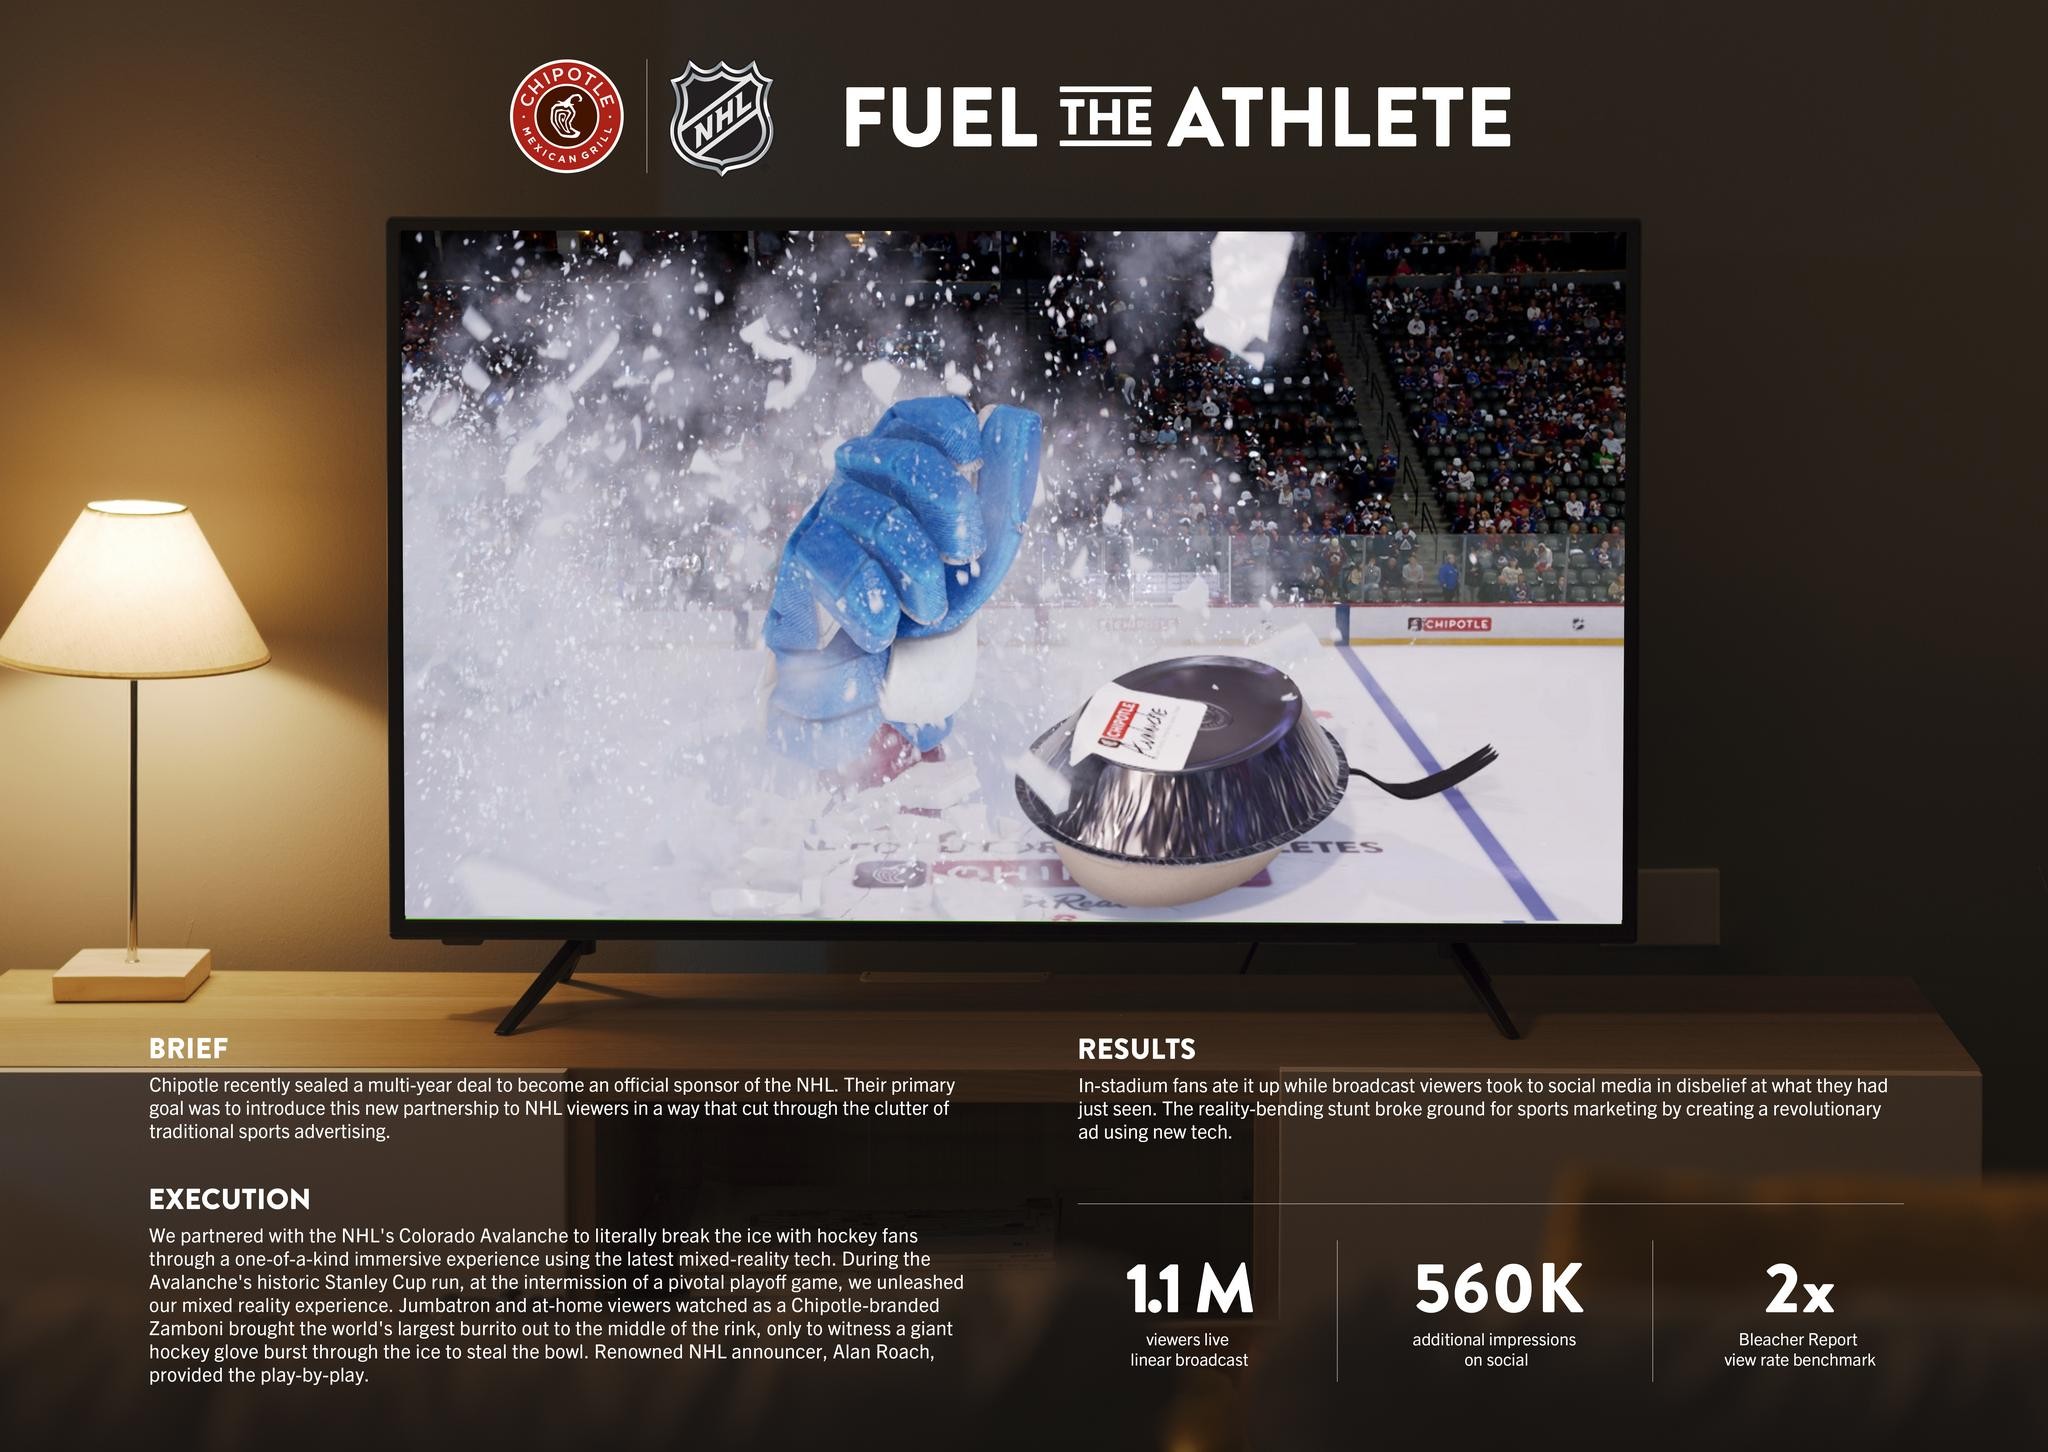 Chipotle x NHL: Fuel the Athlete